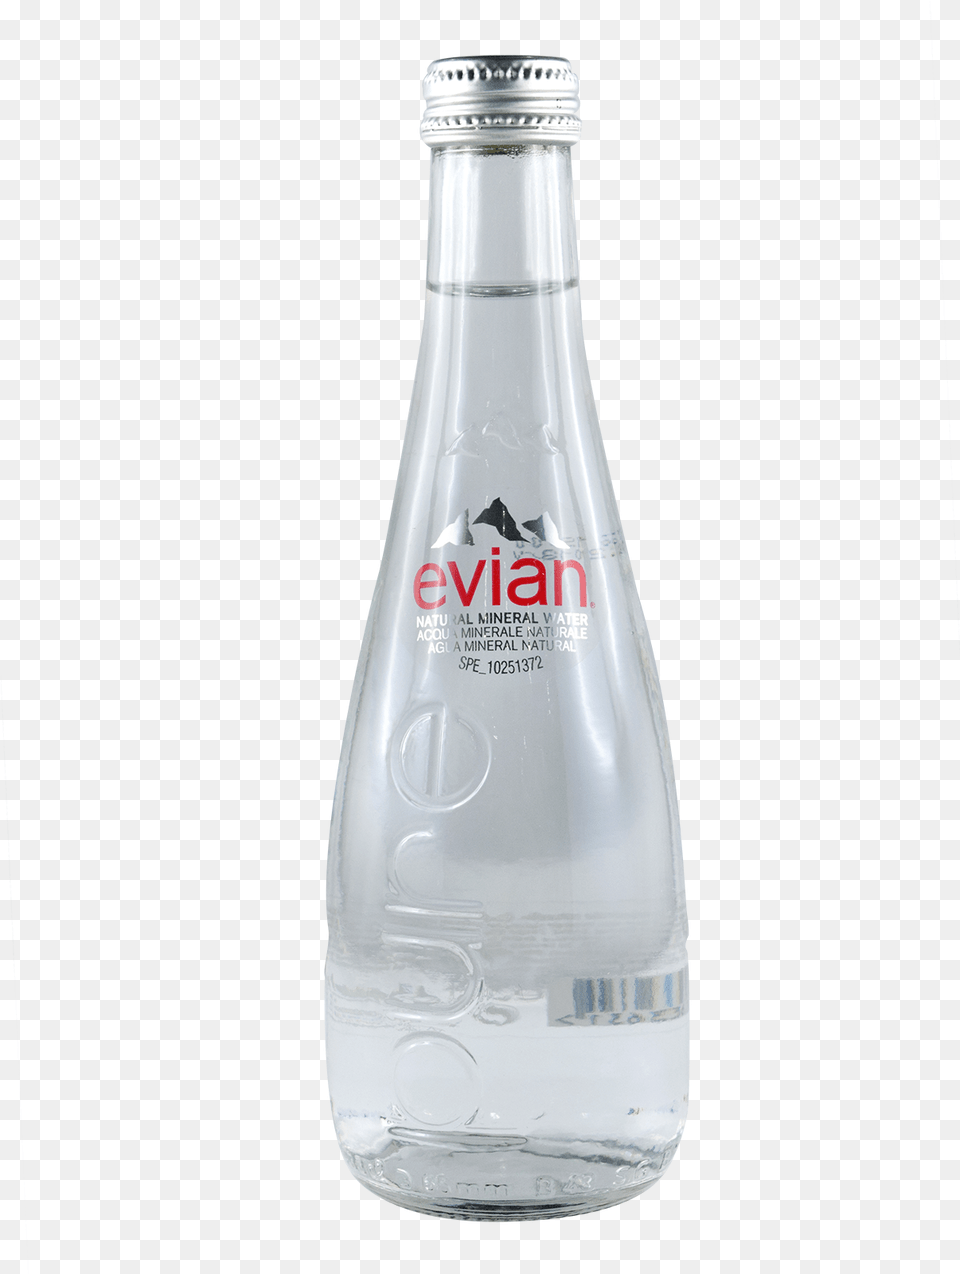 Evian Mineral Water Glass Download, Bottle, Beverage, Mineral Water, Water Bottle Free Transparent Png